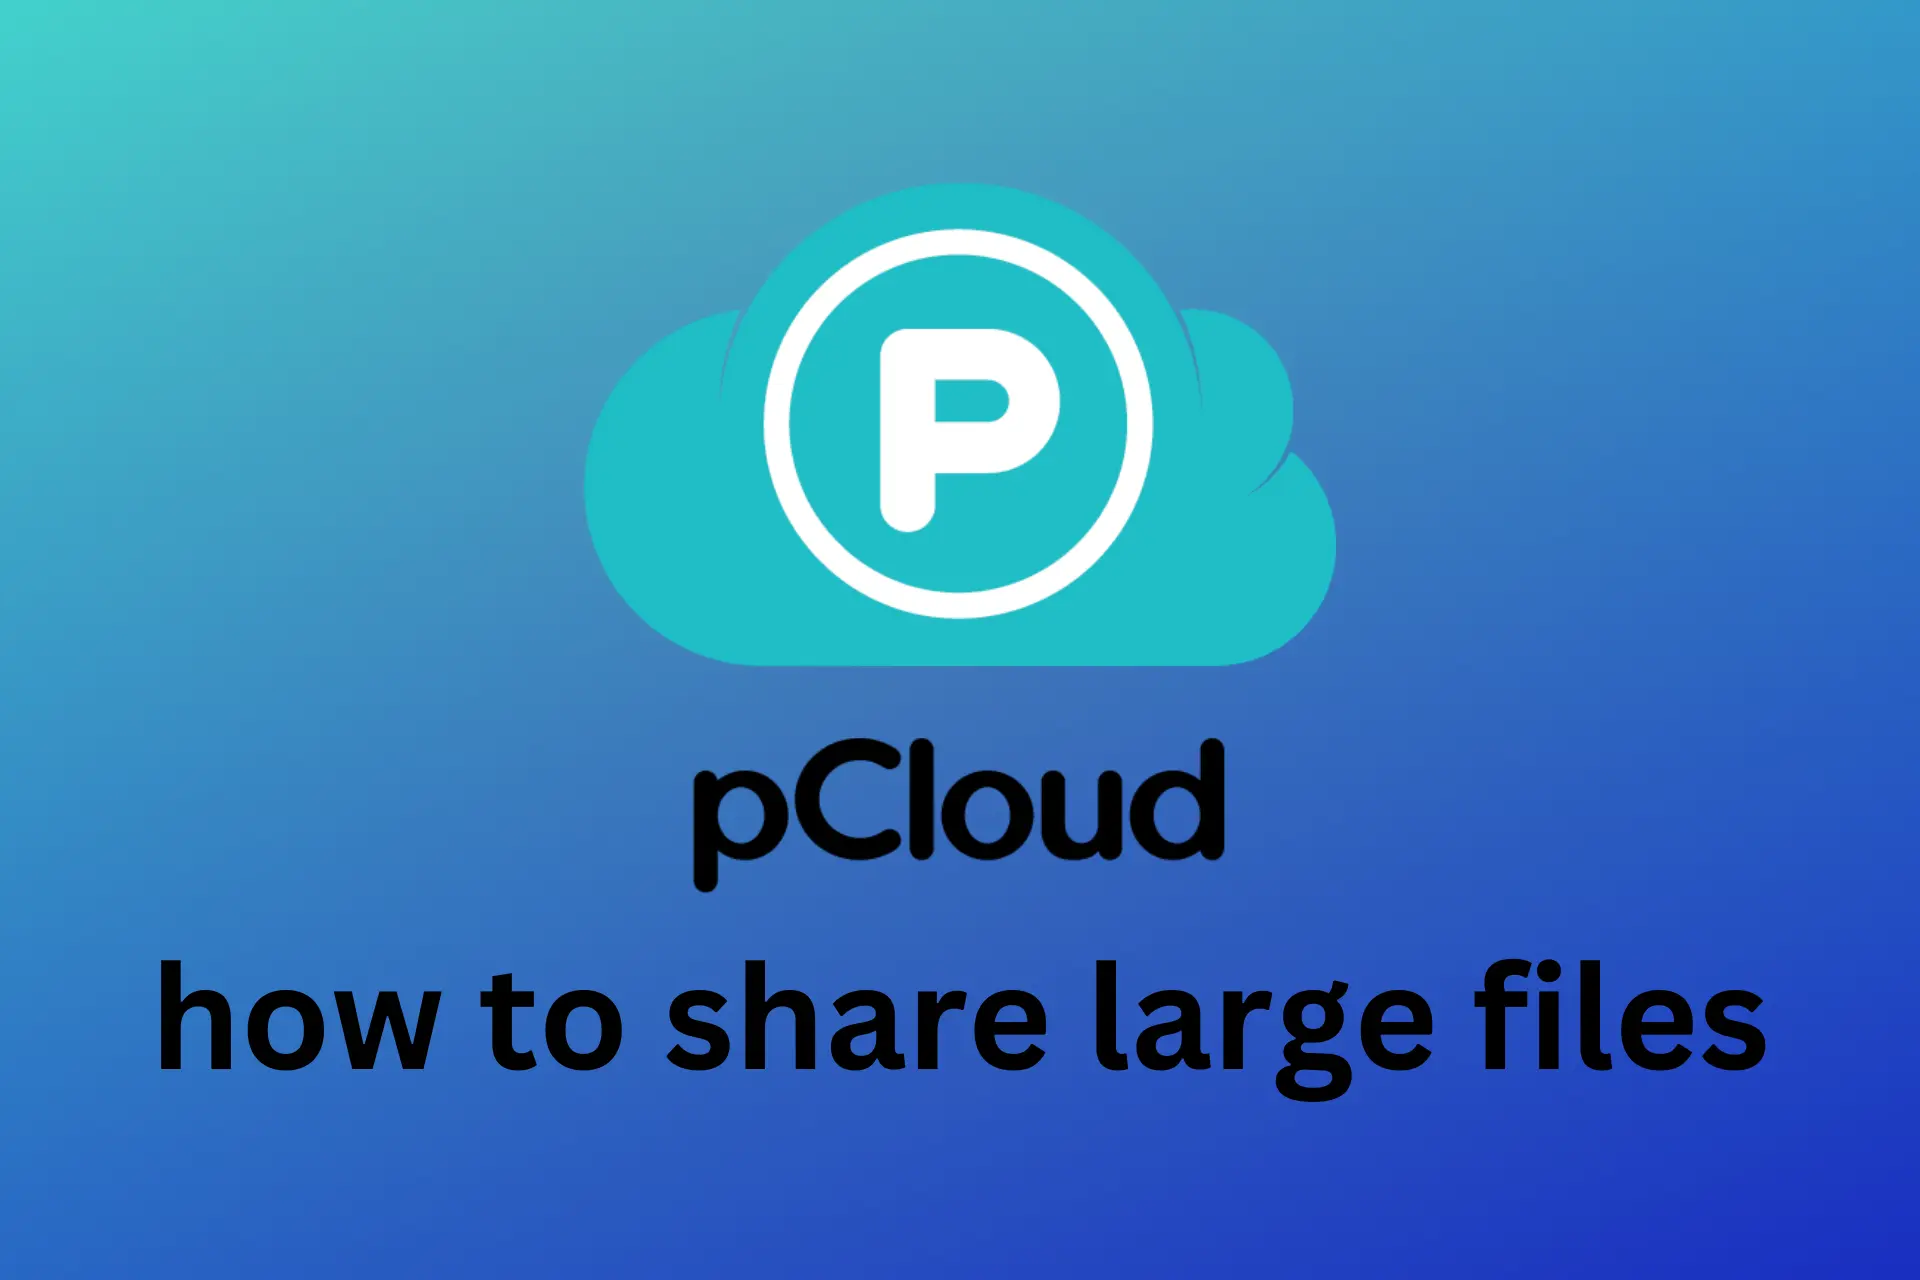 pcloud how to send large files